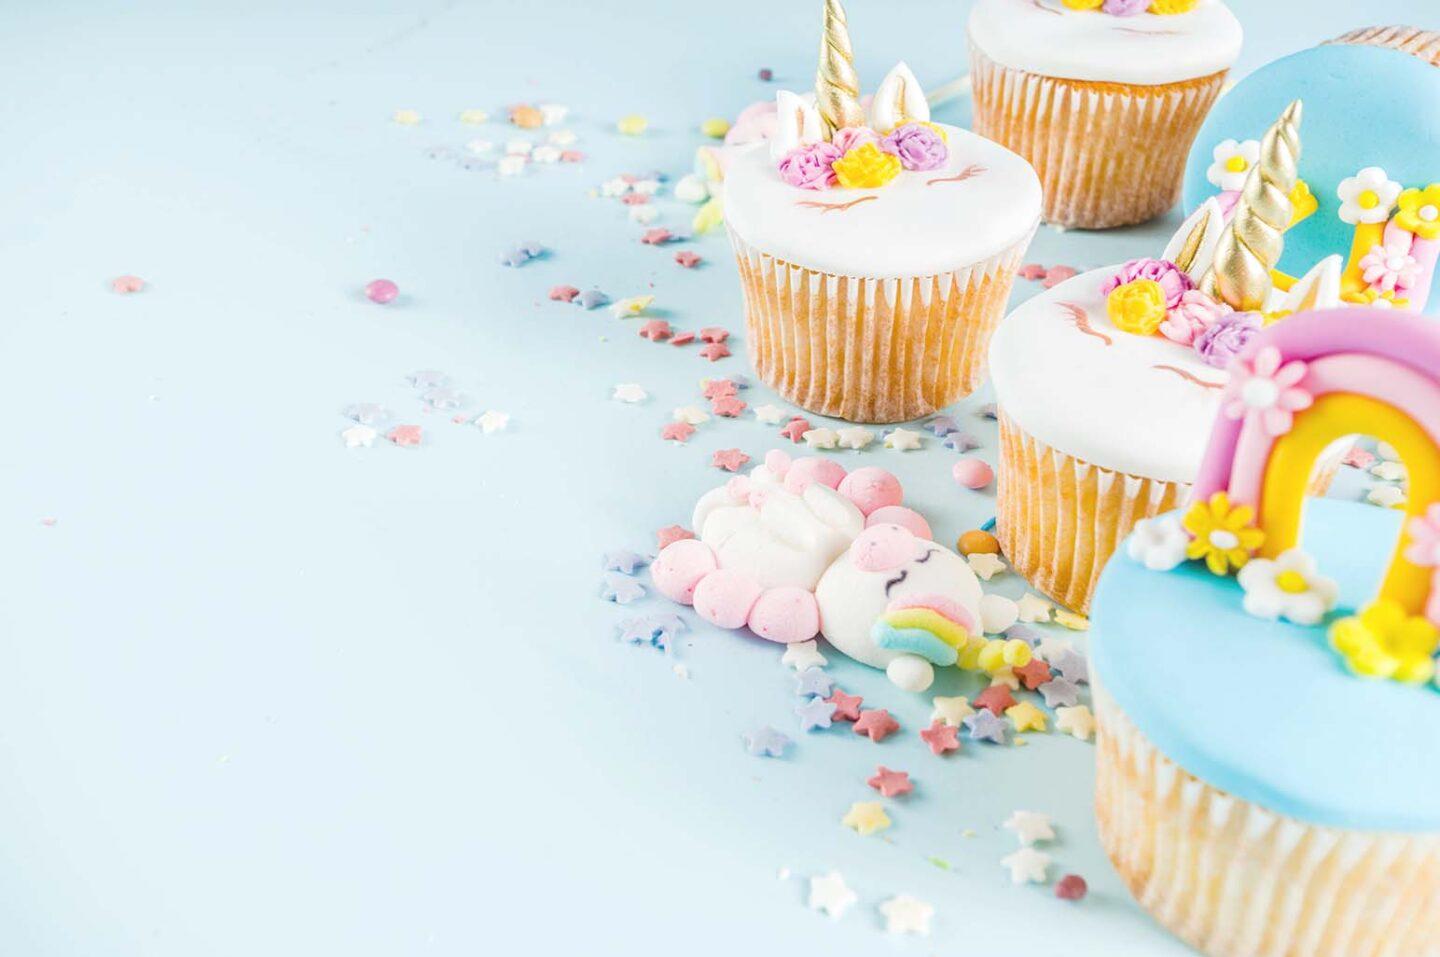 The Essential Guide: Finding the Perfect Birthday Venue for Kids